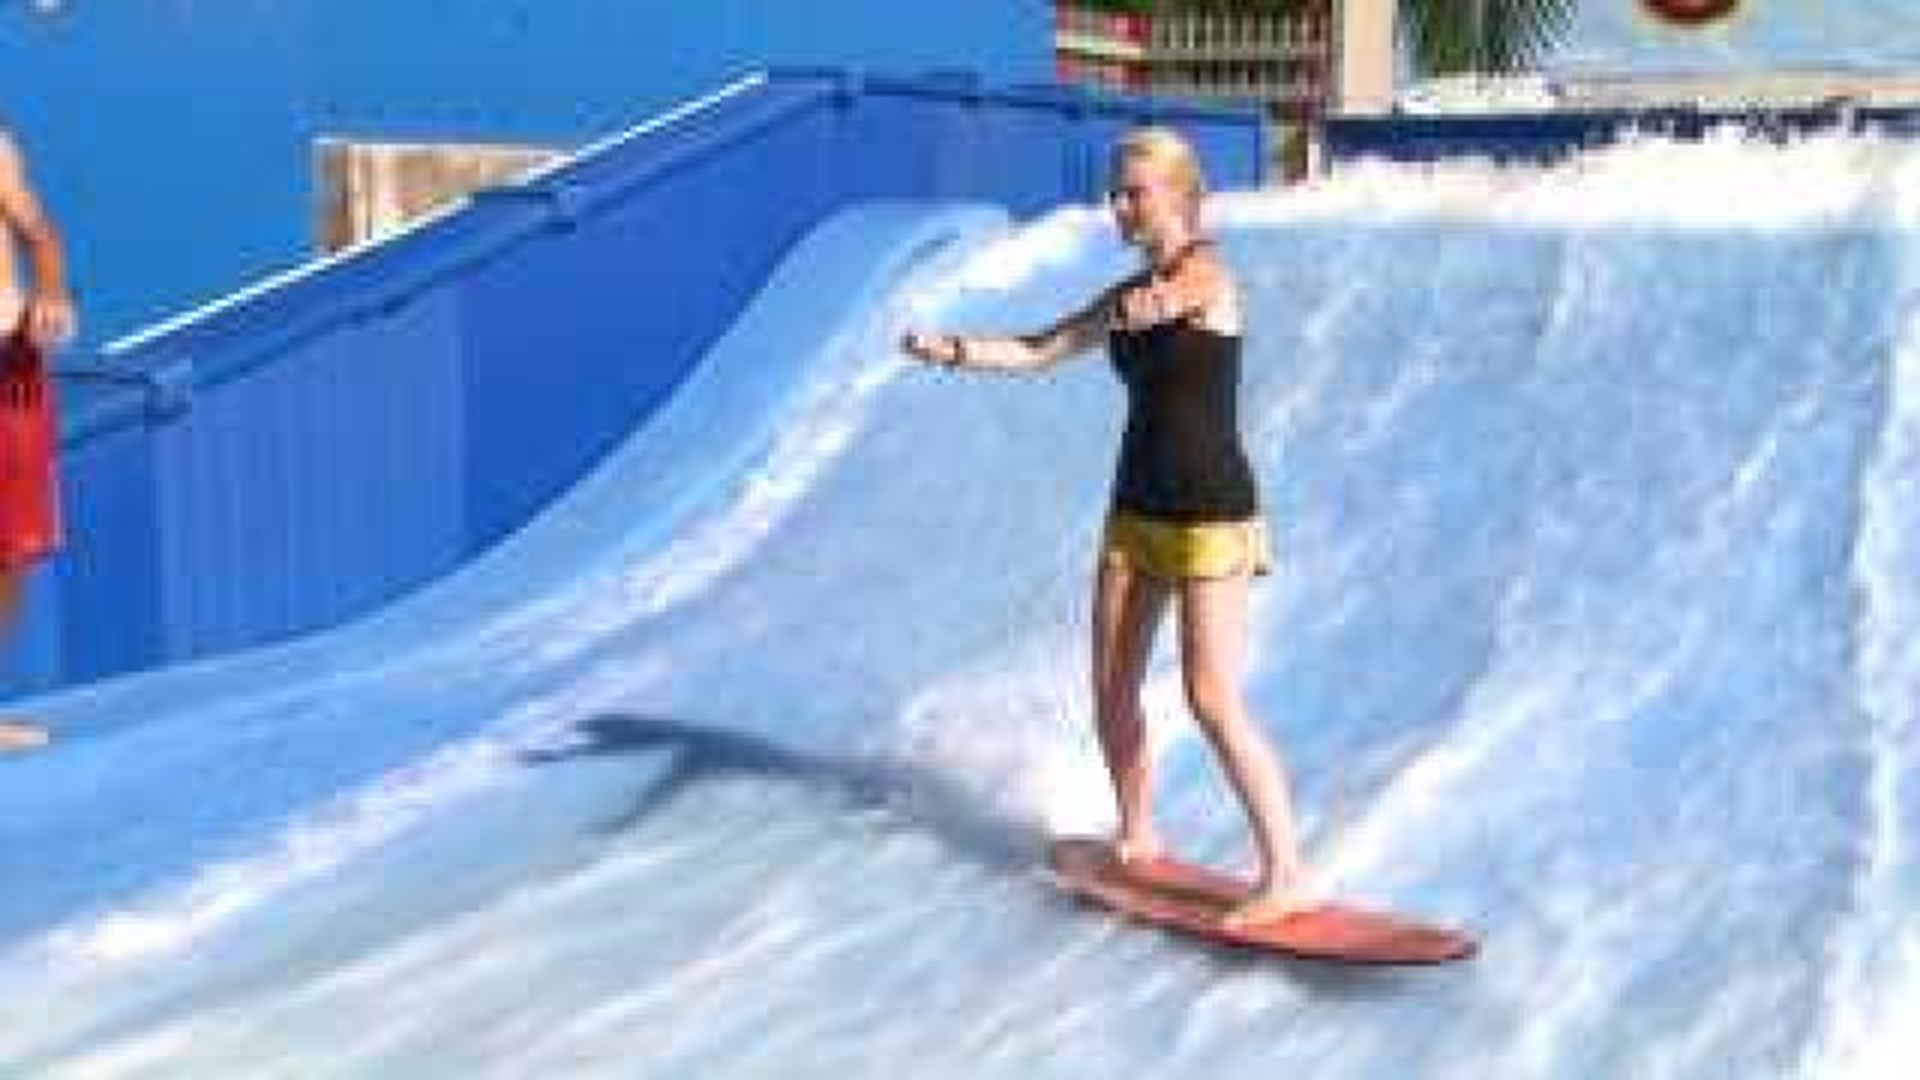 FlowRider Surfing Show and Tell